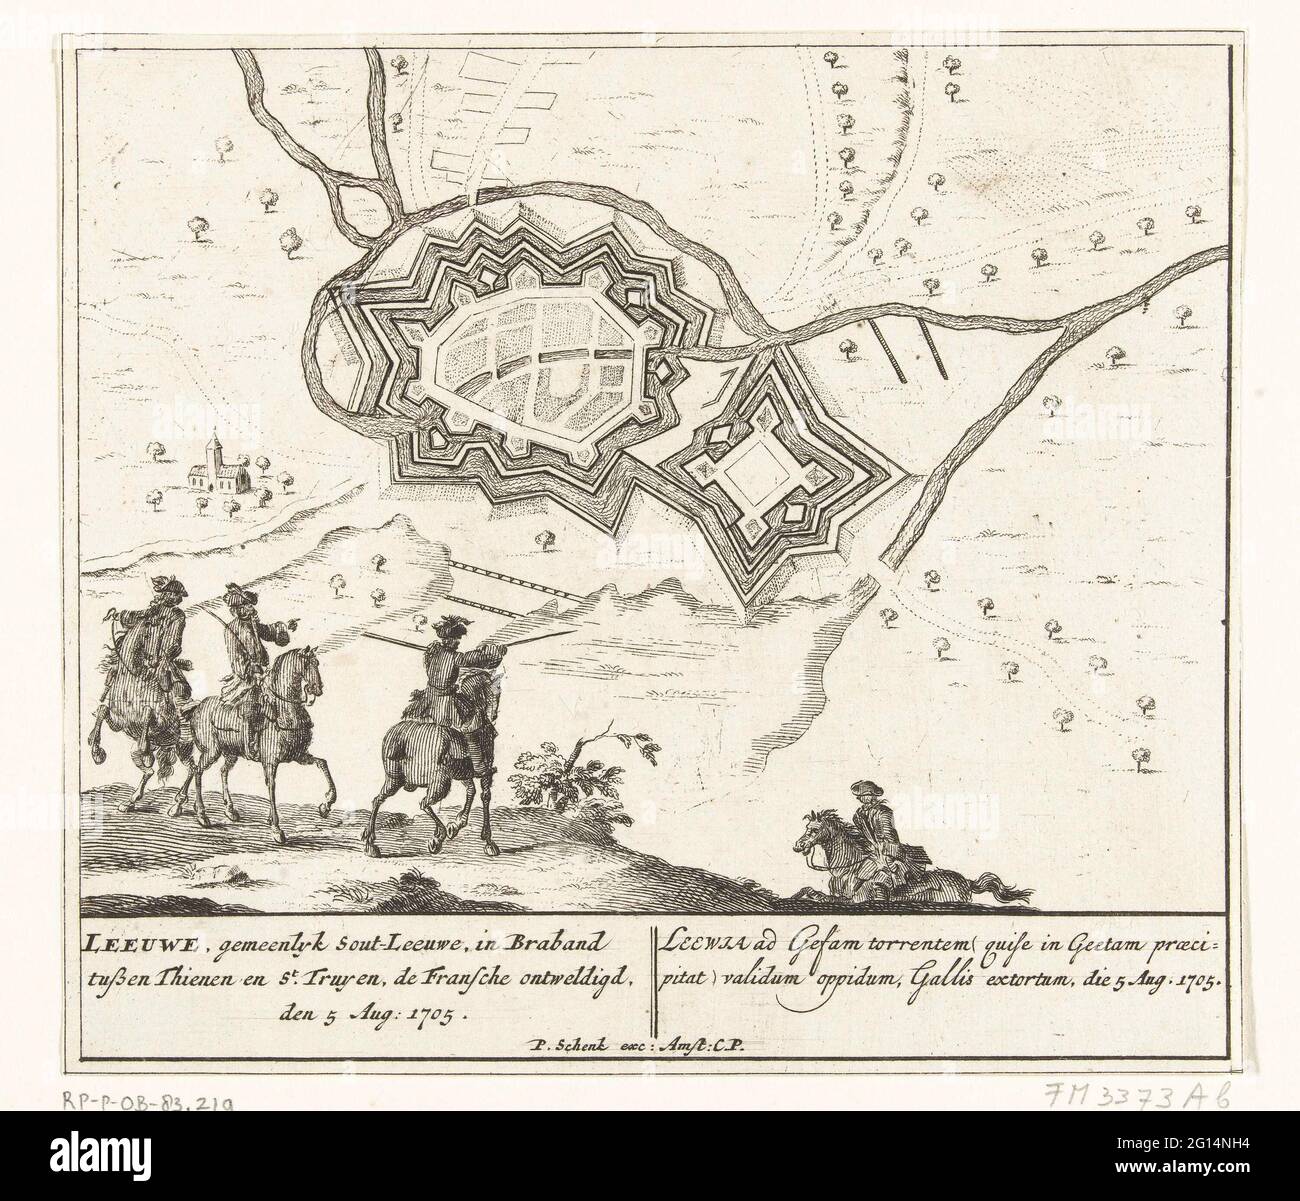 Map of Zoutleeuw, 1705; Leeuwe, in Braband between Thienen and St. Truyen, Dismissed the French, on Aug. 5: 1705. Map of the reinforcements around Zoutleeuw place, conquered on the French by the Allies, August 5, 1705. With captions in Dutch and Latin. Fragment of a large plate with nine performances of events from the year 1705 of the Spanish Succession War. Stock Photo